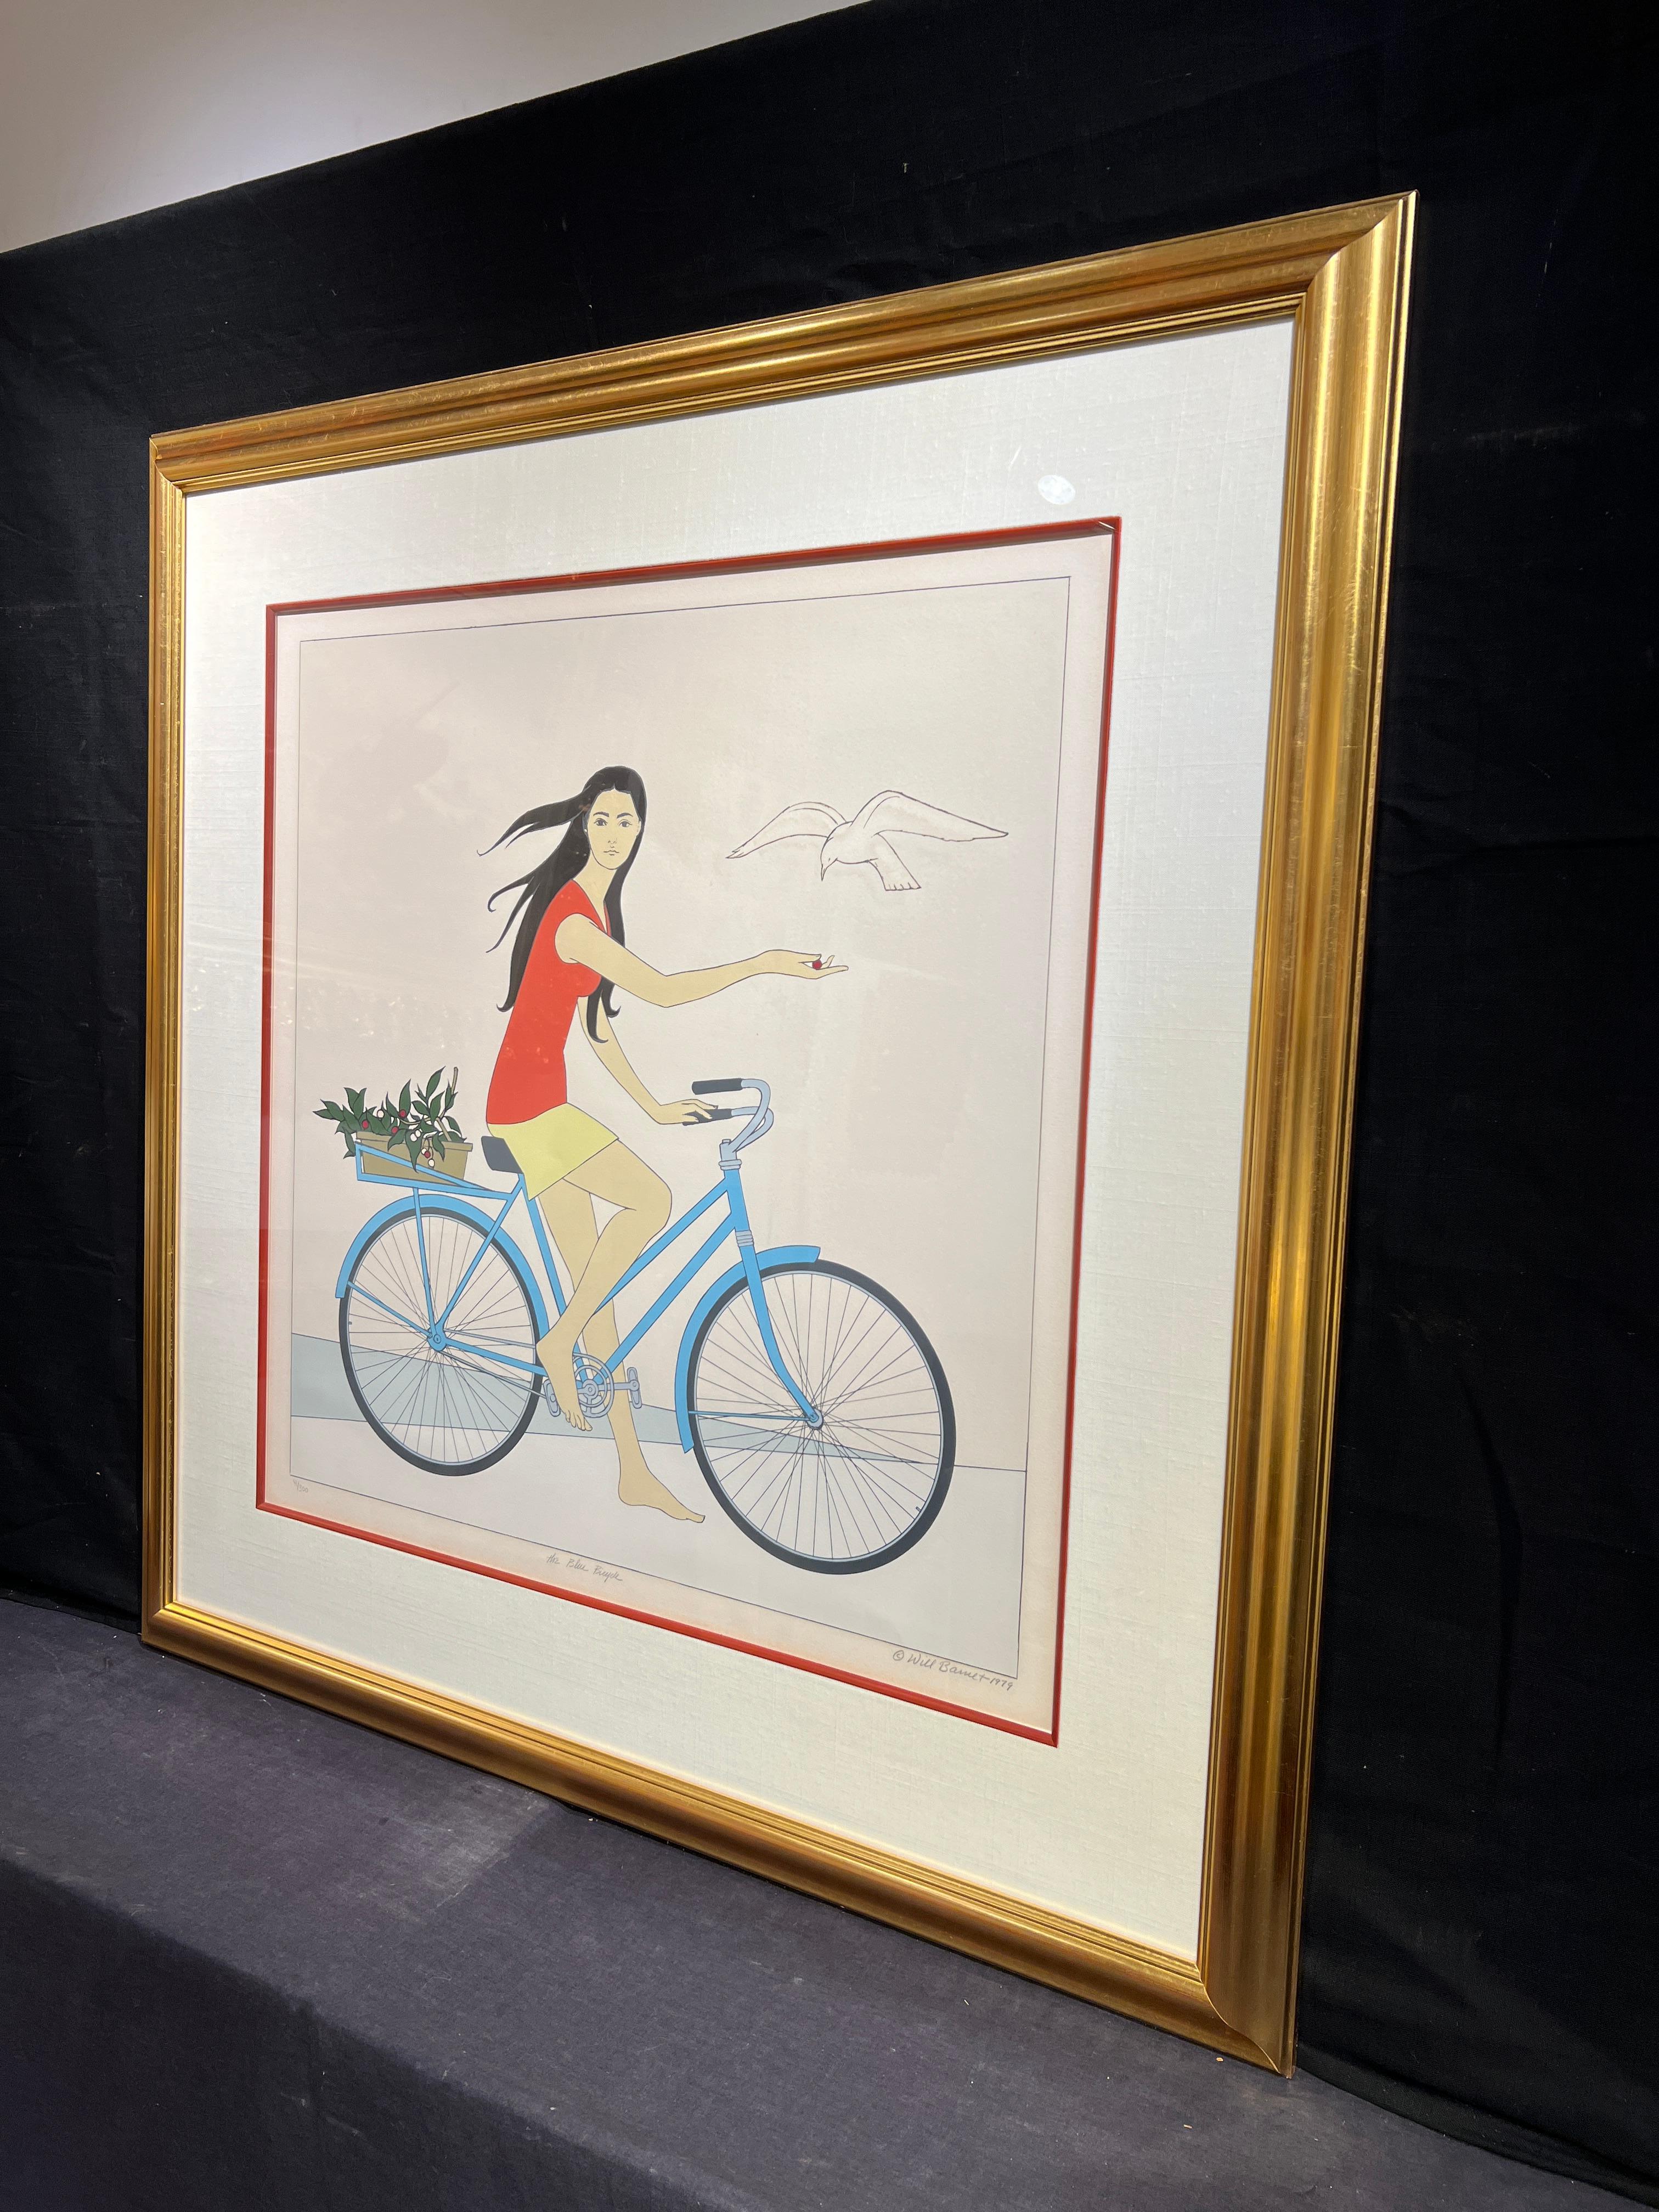 The Blue Bicycle, 1979
Will Barnet (American, 1911-2012)
26 x 25.5 inches
41 x 40 inches with frame
Titled Lower Center
Signed and Dated Lower Right
Edition 41/300 Lower Left

From Beverly, Massachusetts, Will Barnet became a leading 20th-century